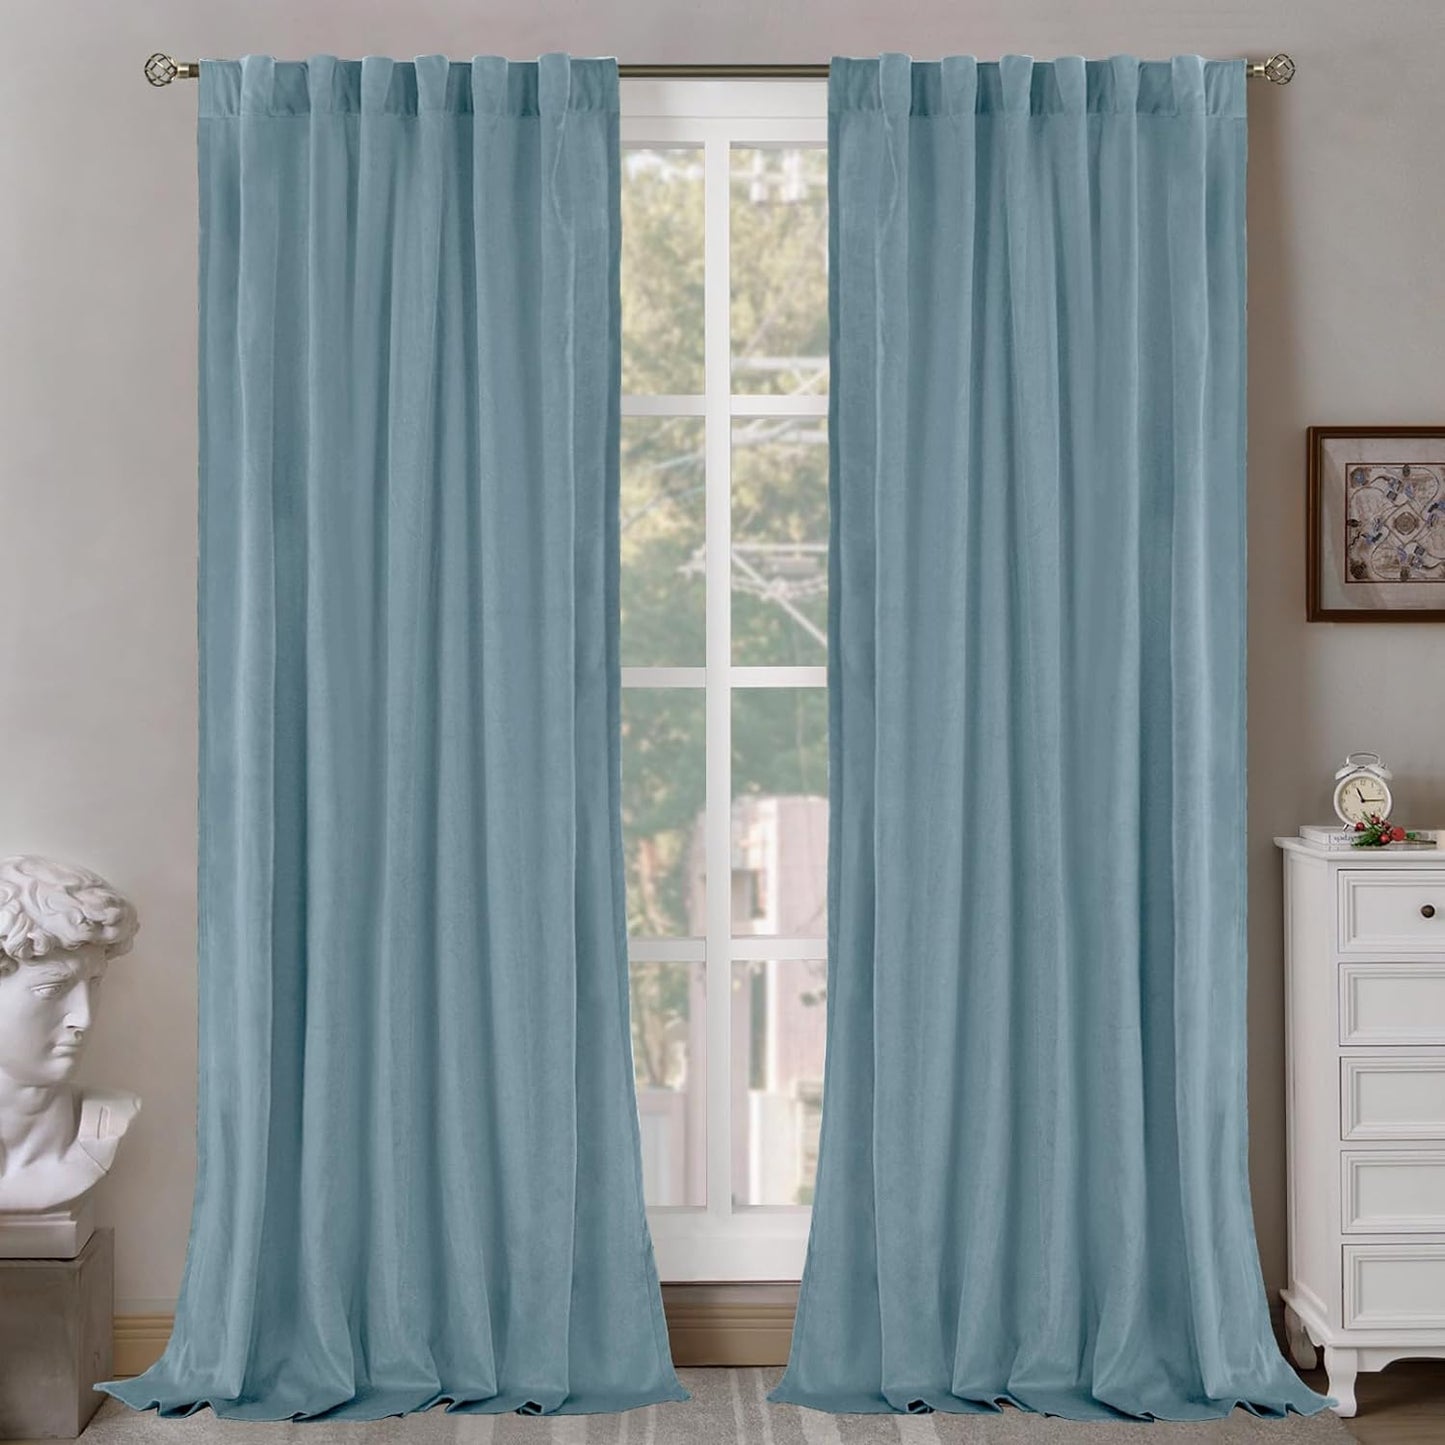 Bgment Grey Velvet Curtains 108 Inches Long for Living Room, Thermal Insulated Room Darkening Curtains Drapes Window Treatment with Back Tab and Rod Pocket, Set of 2 Panels, 52 X 108 Inch  BGment Mist Blue 52W X 90L 